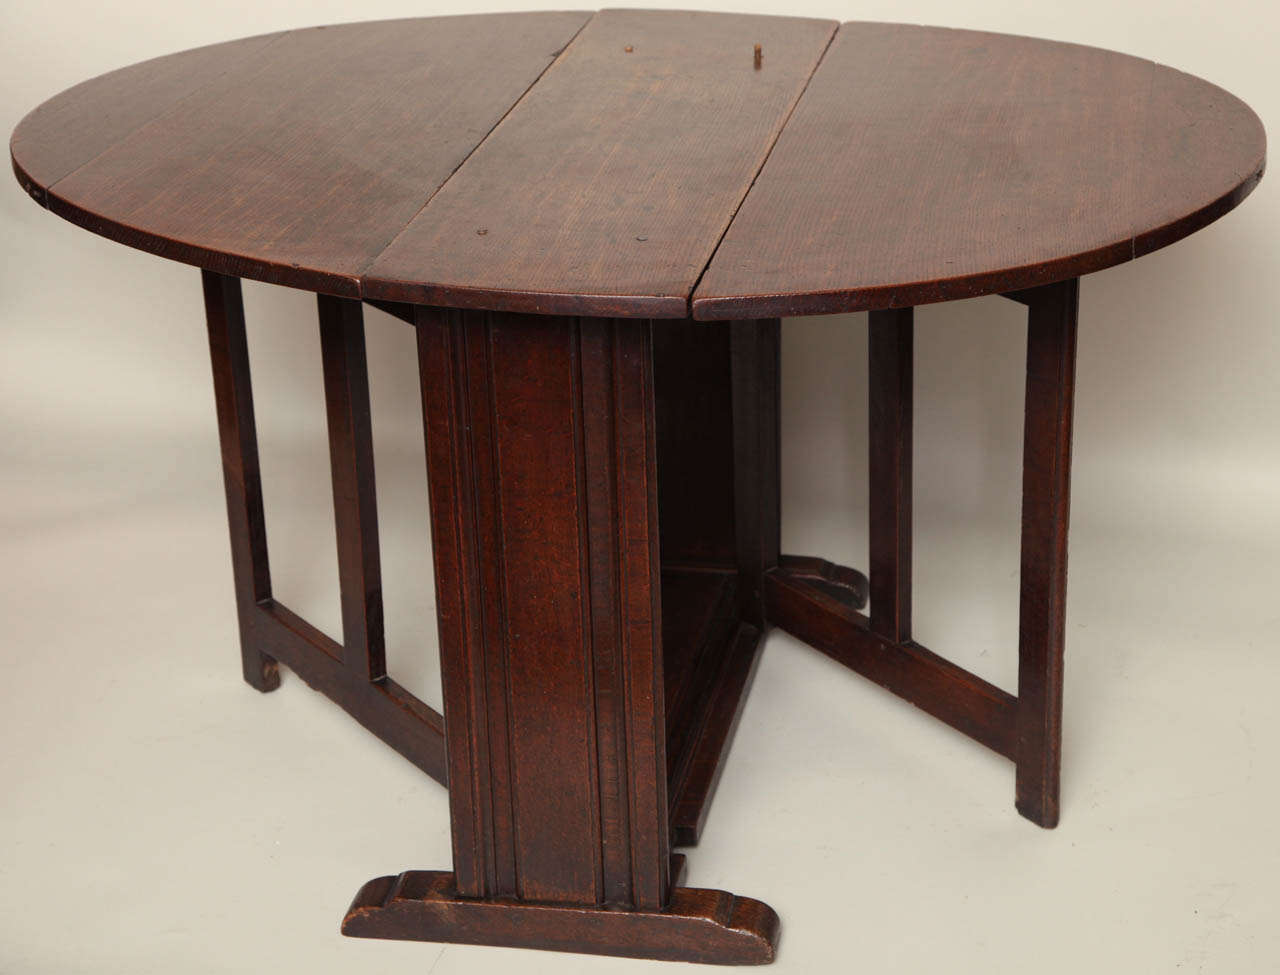 Very unusual late 17th Century English or Welsh oak gate leg table, the richly patinated oval top over molded plank ends on shoe feet, the swinging gate legs hinged on the molded platform base, the whole possessing wonderful color.  A similar table